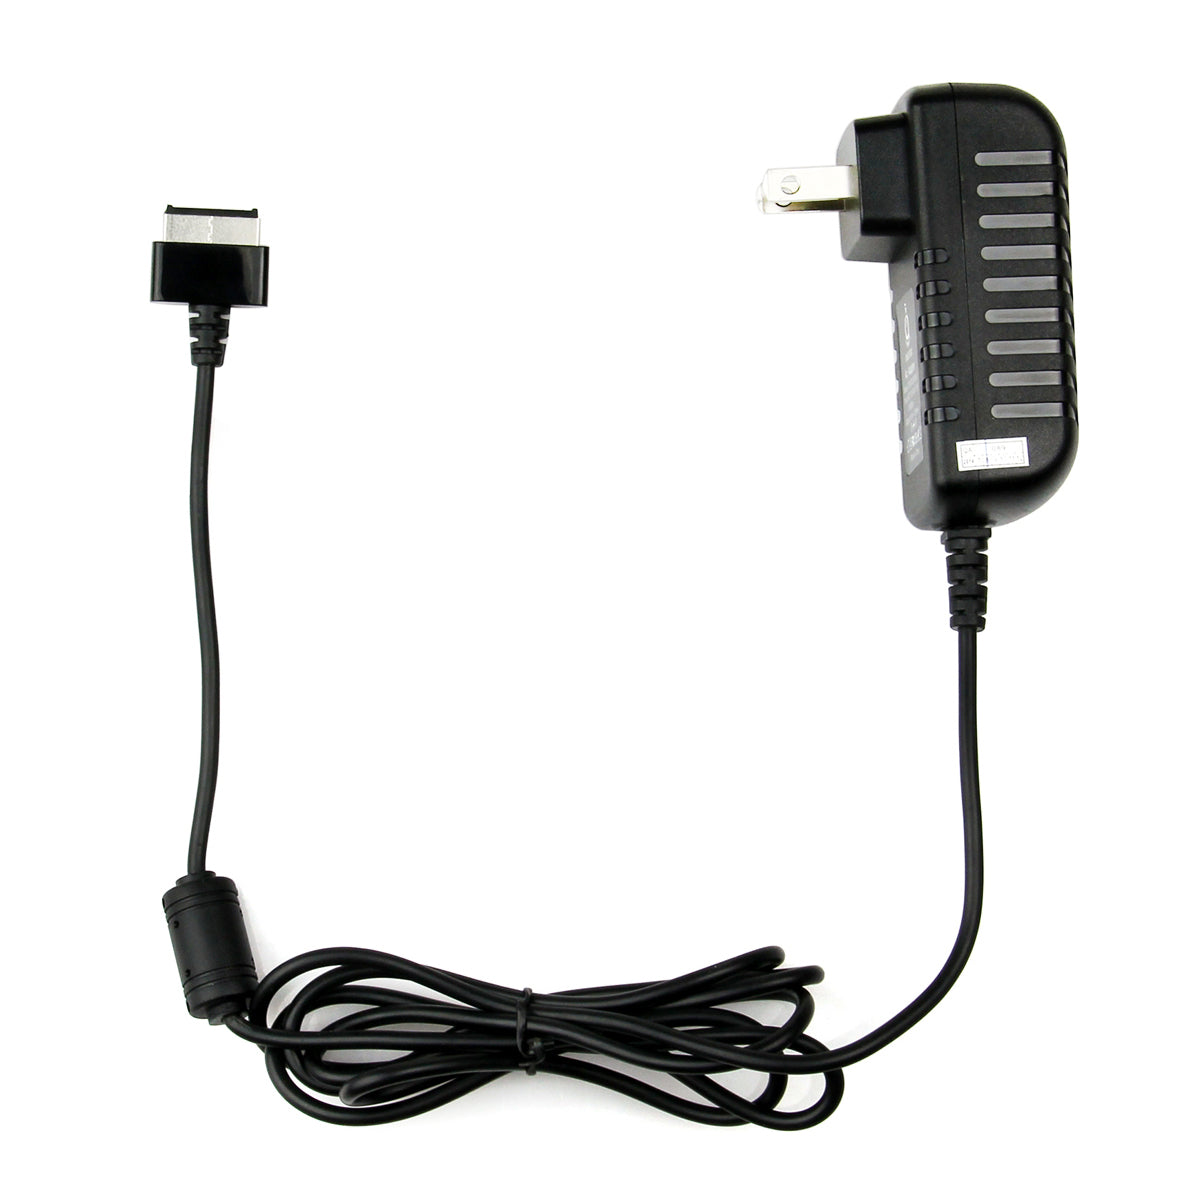 AC Adapter Charger for ASUS TF300T B1 Eee Pad.